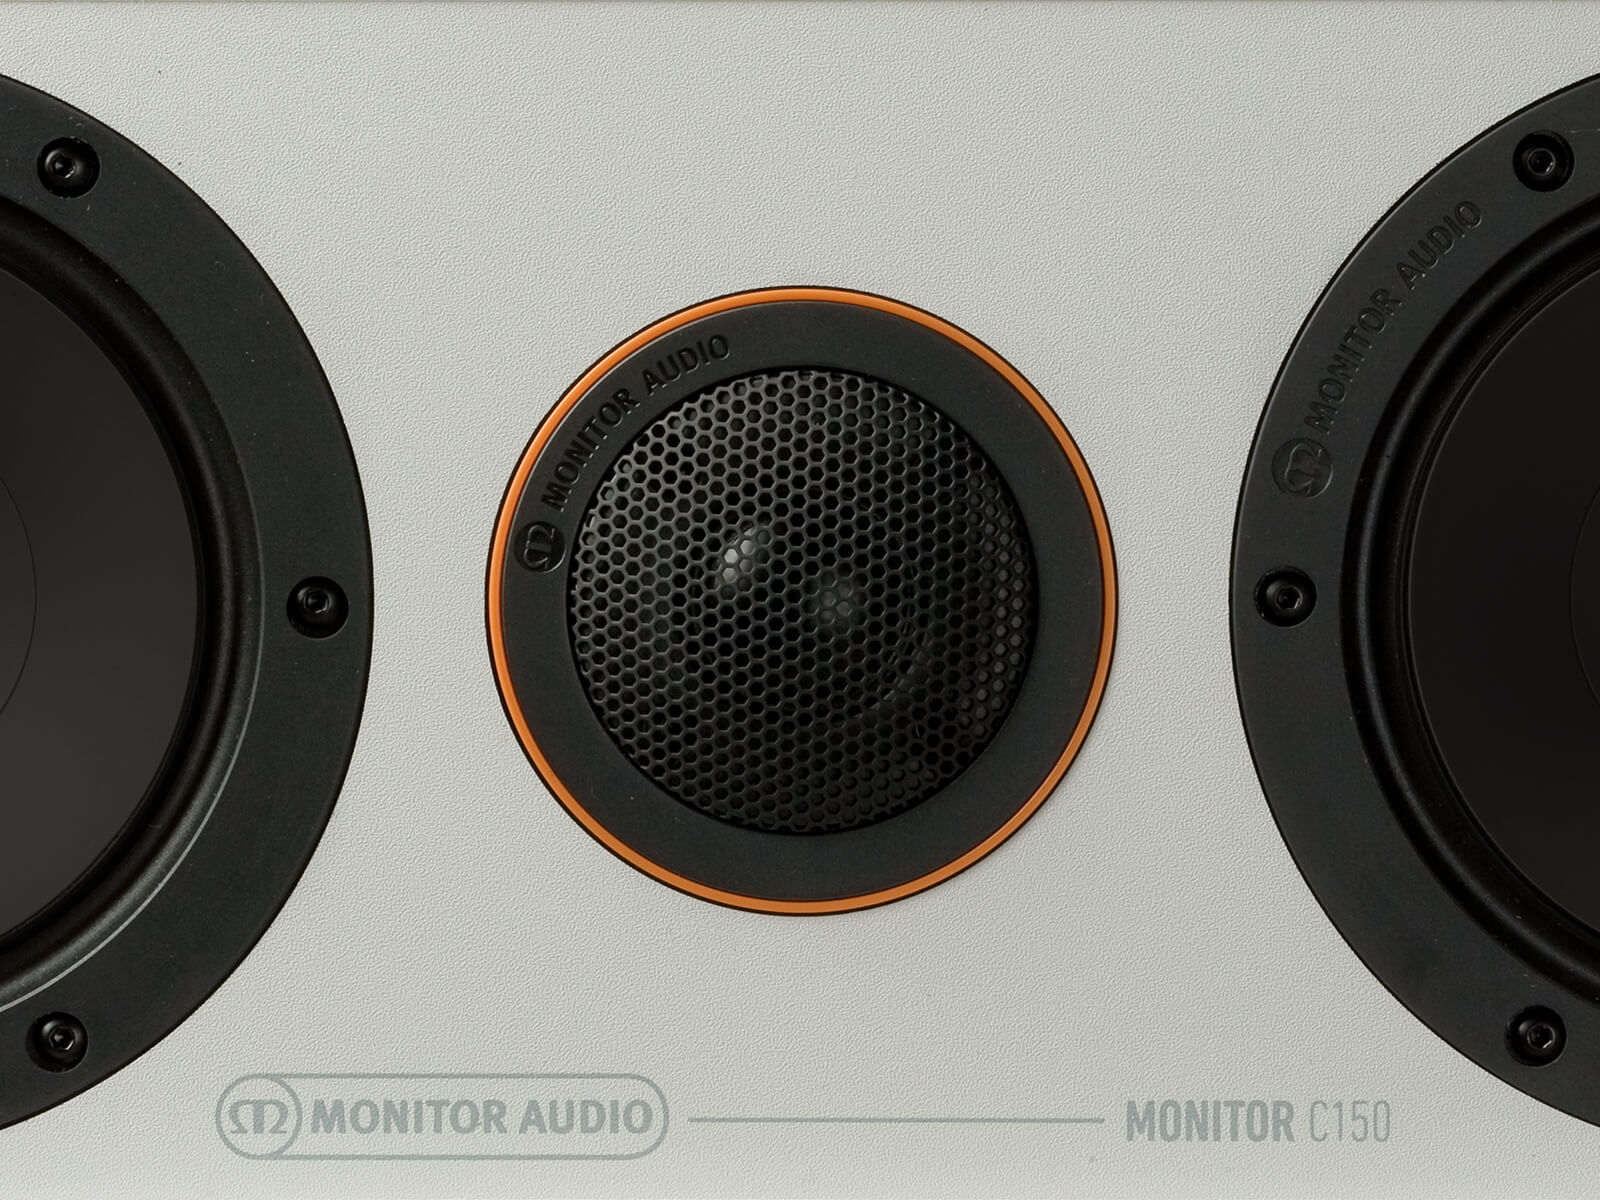 Monitor C150, centre channel speakers, front detail.